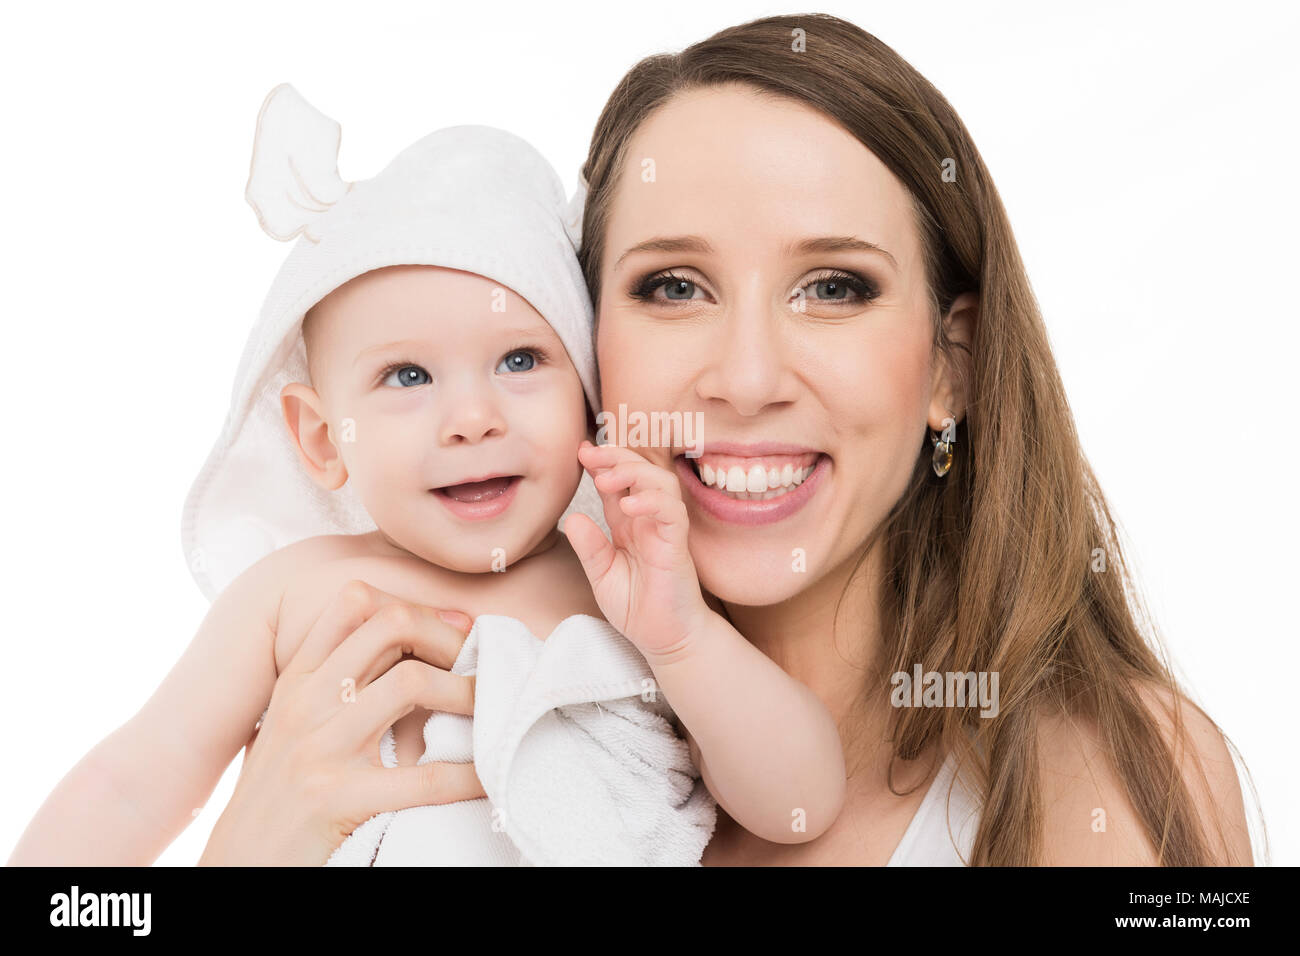 Happy mother hugging her adorable baby son. Happy family. Mother and newborn child portrait isolated on white background. Stock Photo